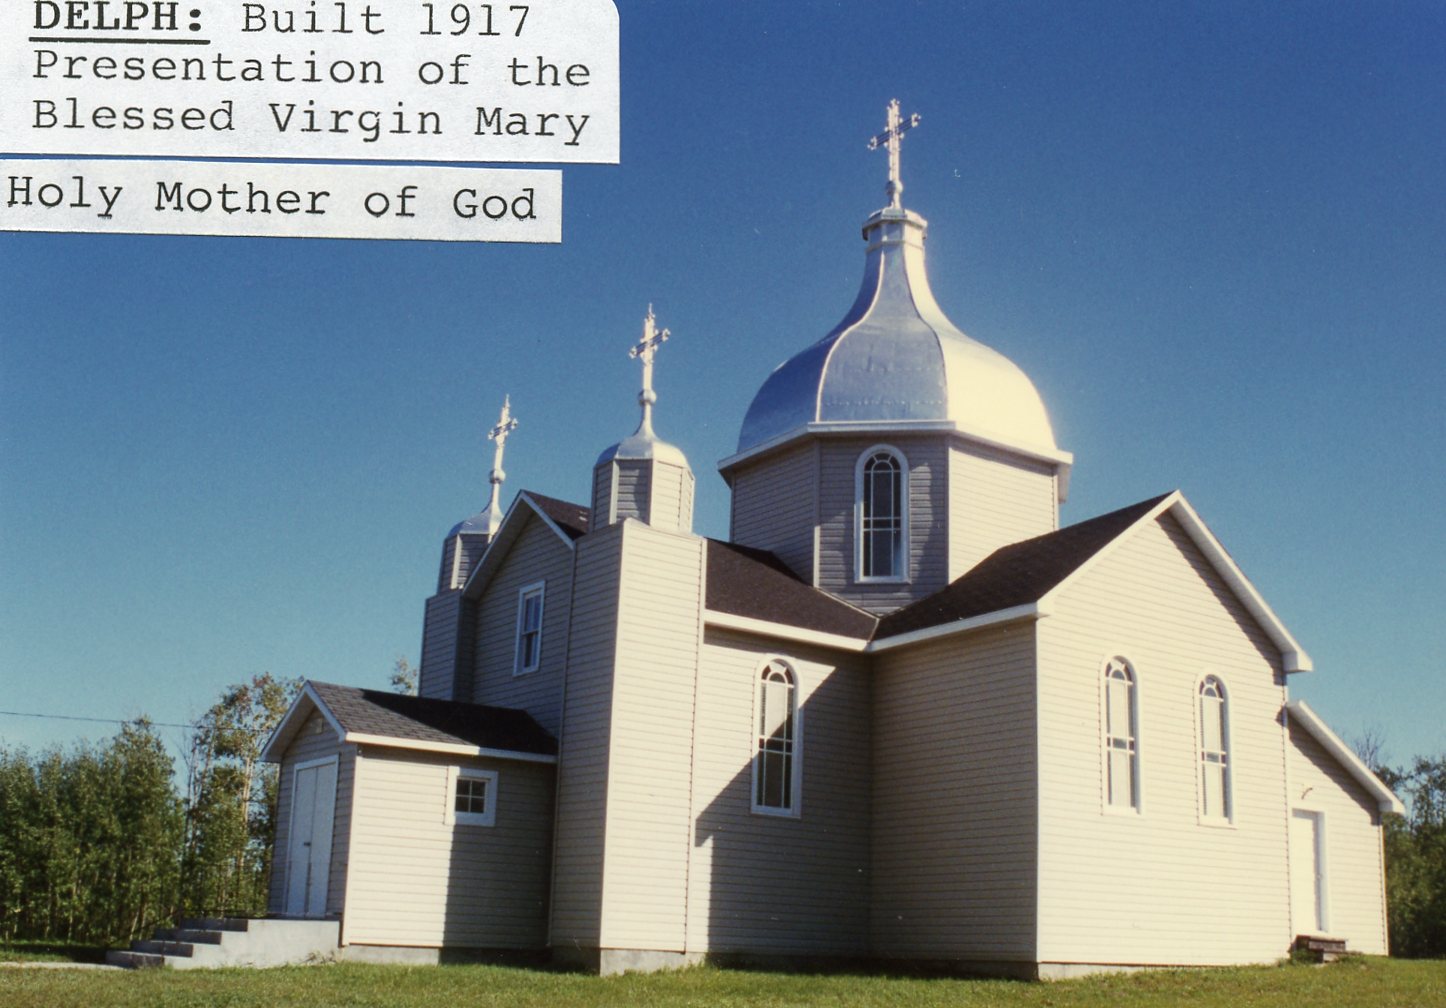 Presentation of the Blessed Virgin Mary Parish - Delph, AB (Lamont District)